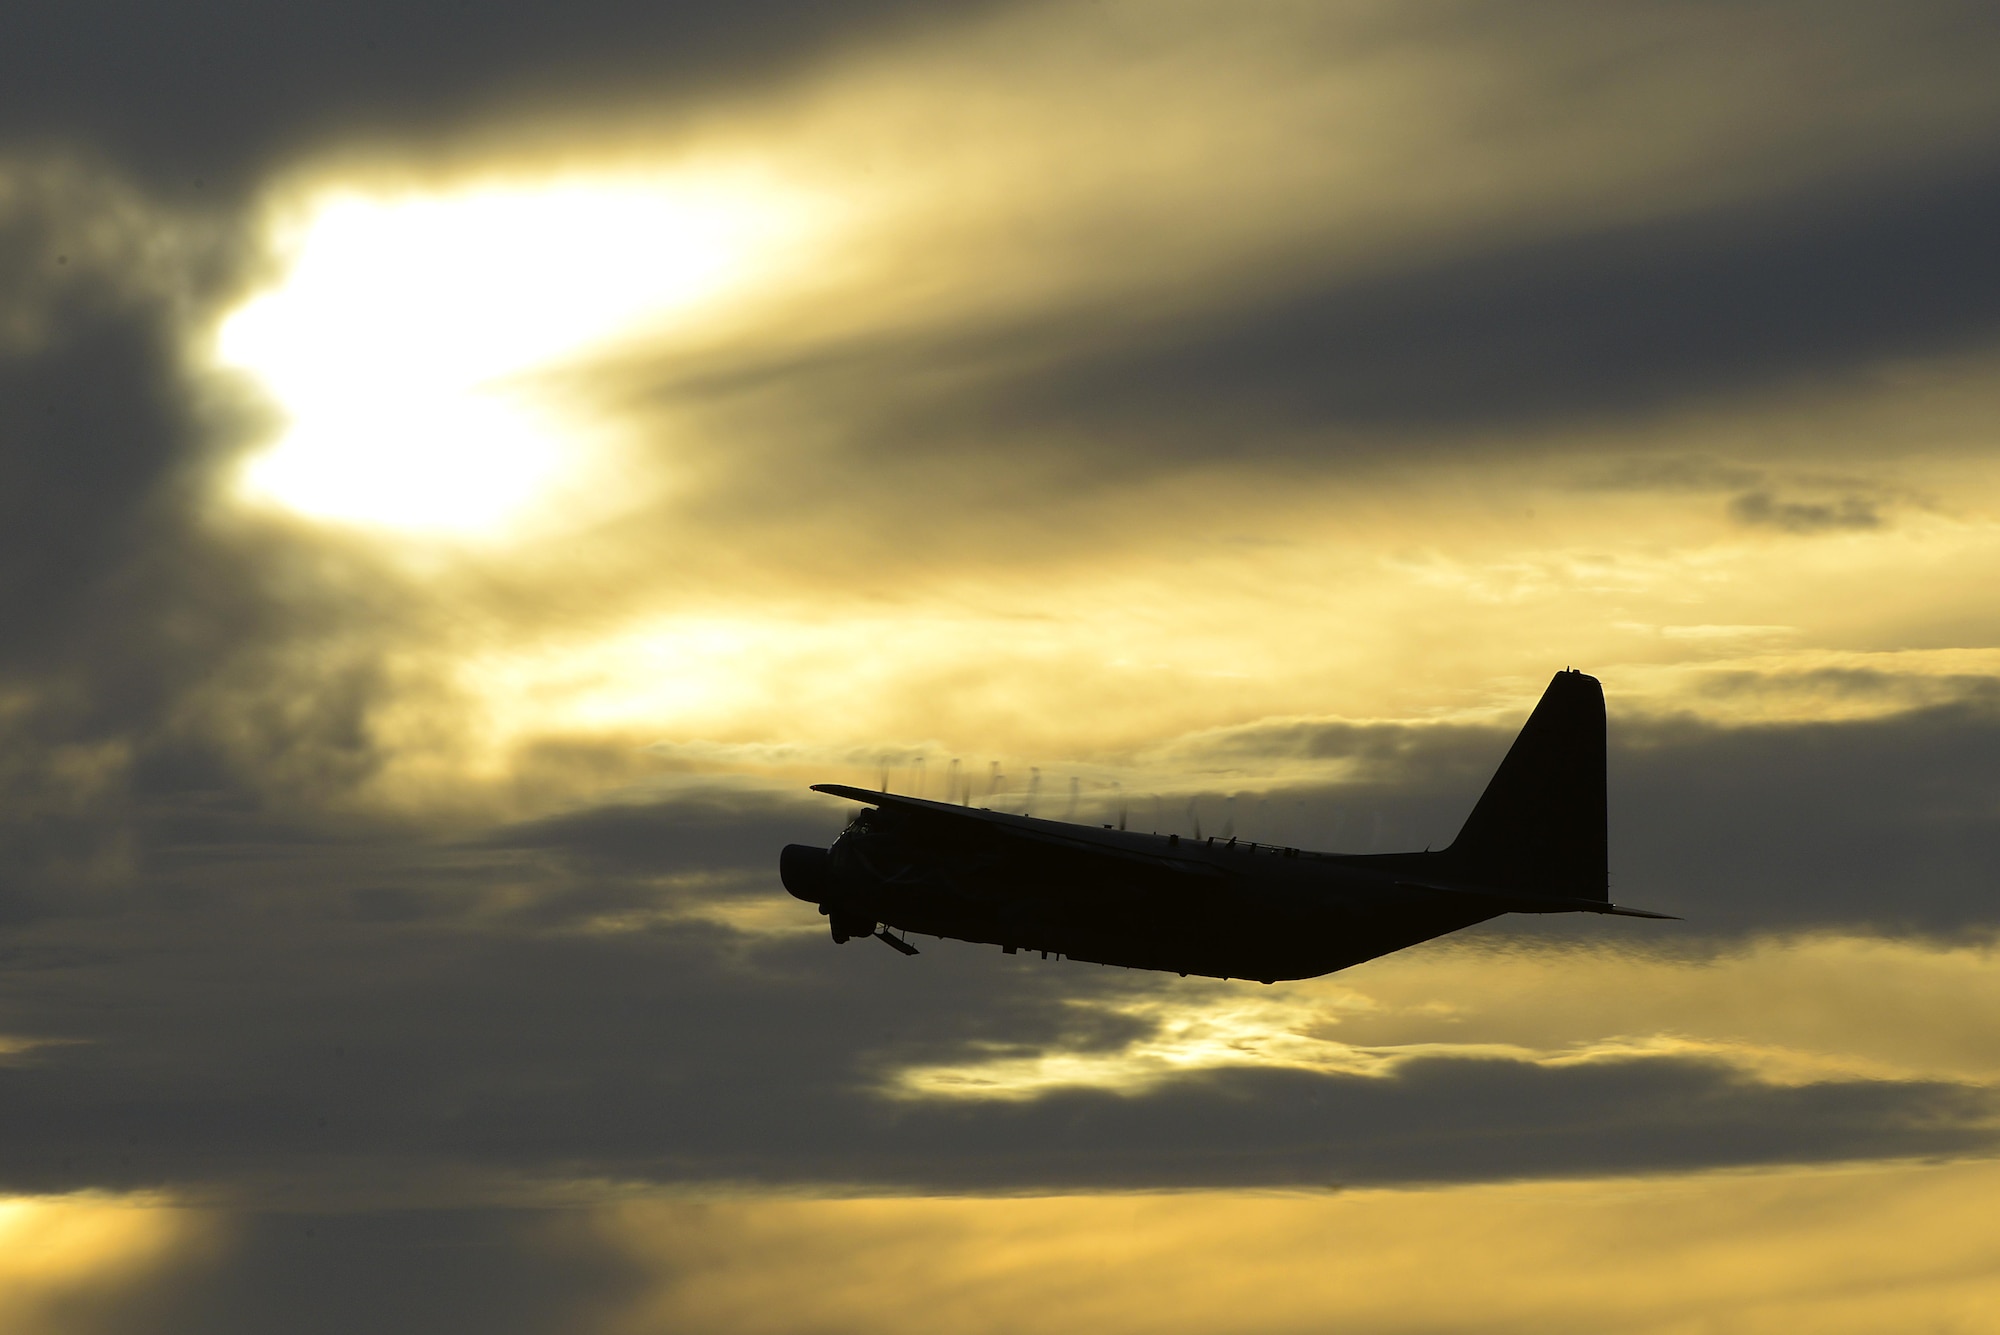 A U.S. Air Force MC-130H Combat Talon II from the 1st Special Operations Squadron flies over Kadena Air Base, Japan, shortly after takeoff May 14, 2015.  The 1st Special Operations Squadron operates the MC-130H providing infiltration, exfiltration, and resupply of special operations forces and equipment in hostile or denied territory.  (U.S. Air Force photo by Senior Airman Stephen G. Eigel)